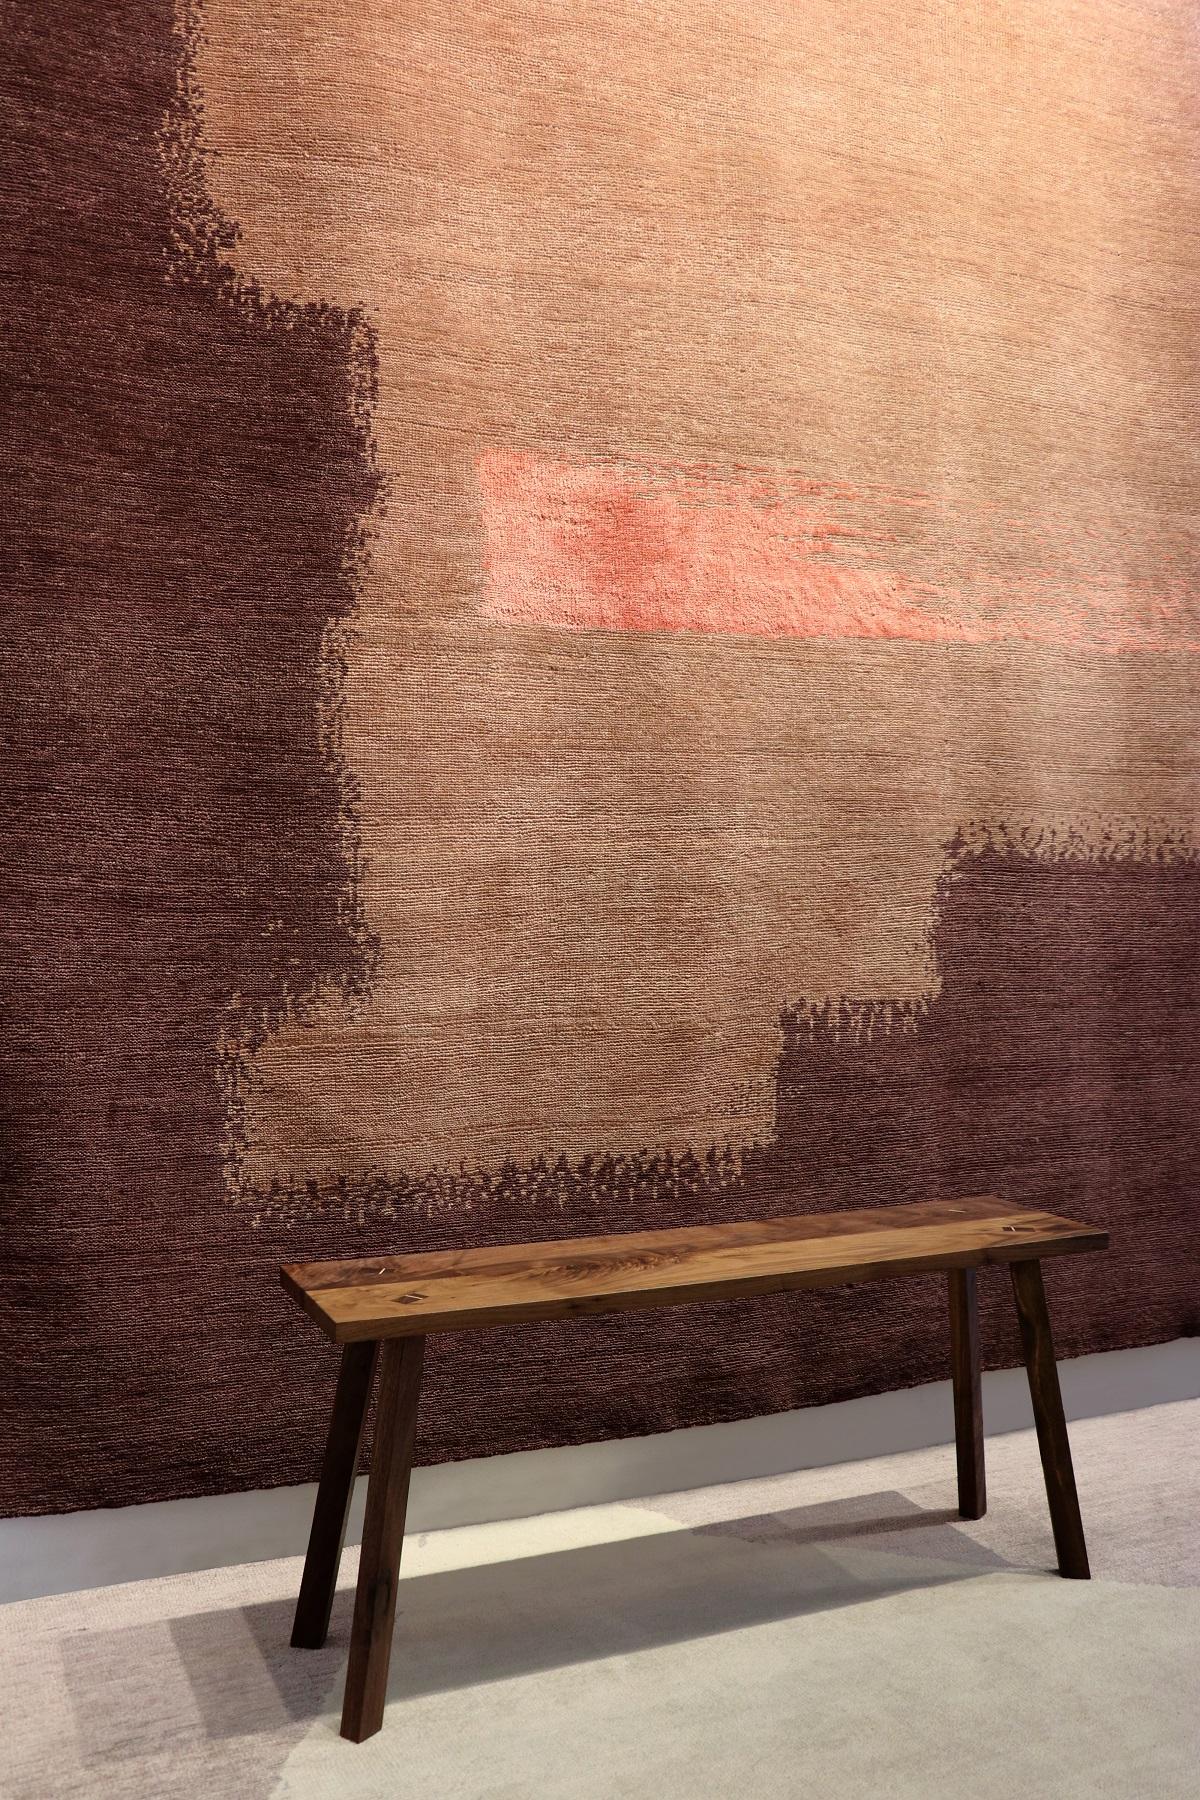 Contemporary Design Rug Burgundy Peach and Coral Hand-Knotted Wool in Stock 5